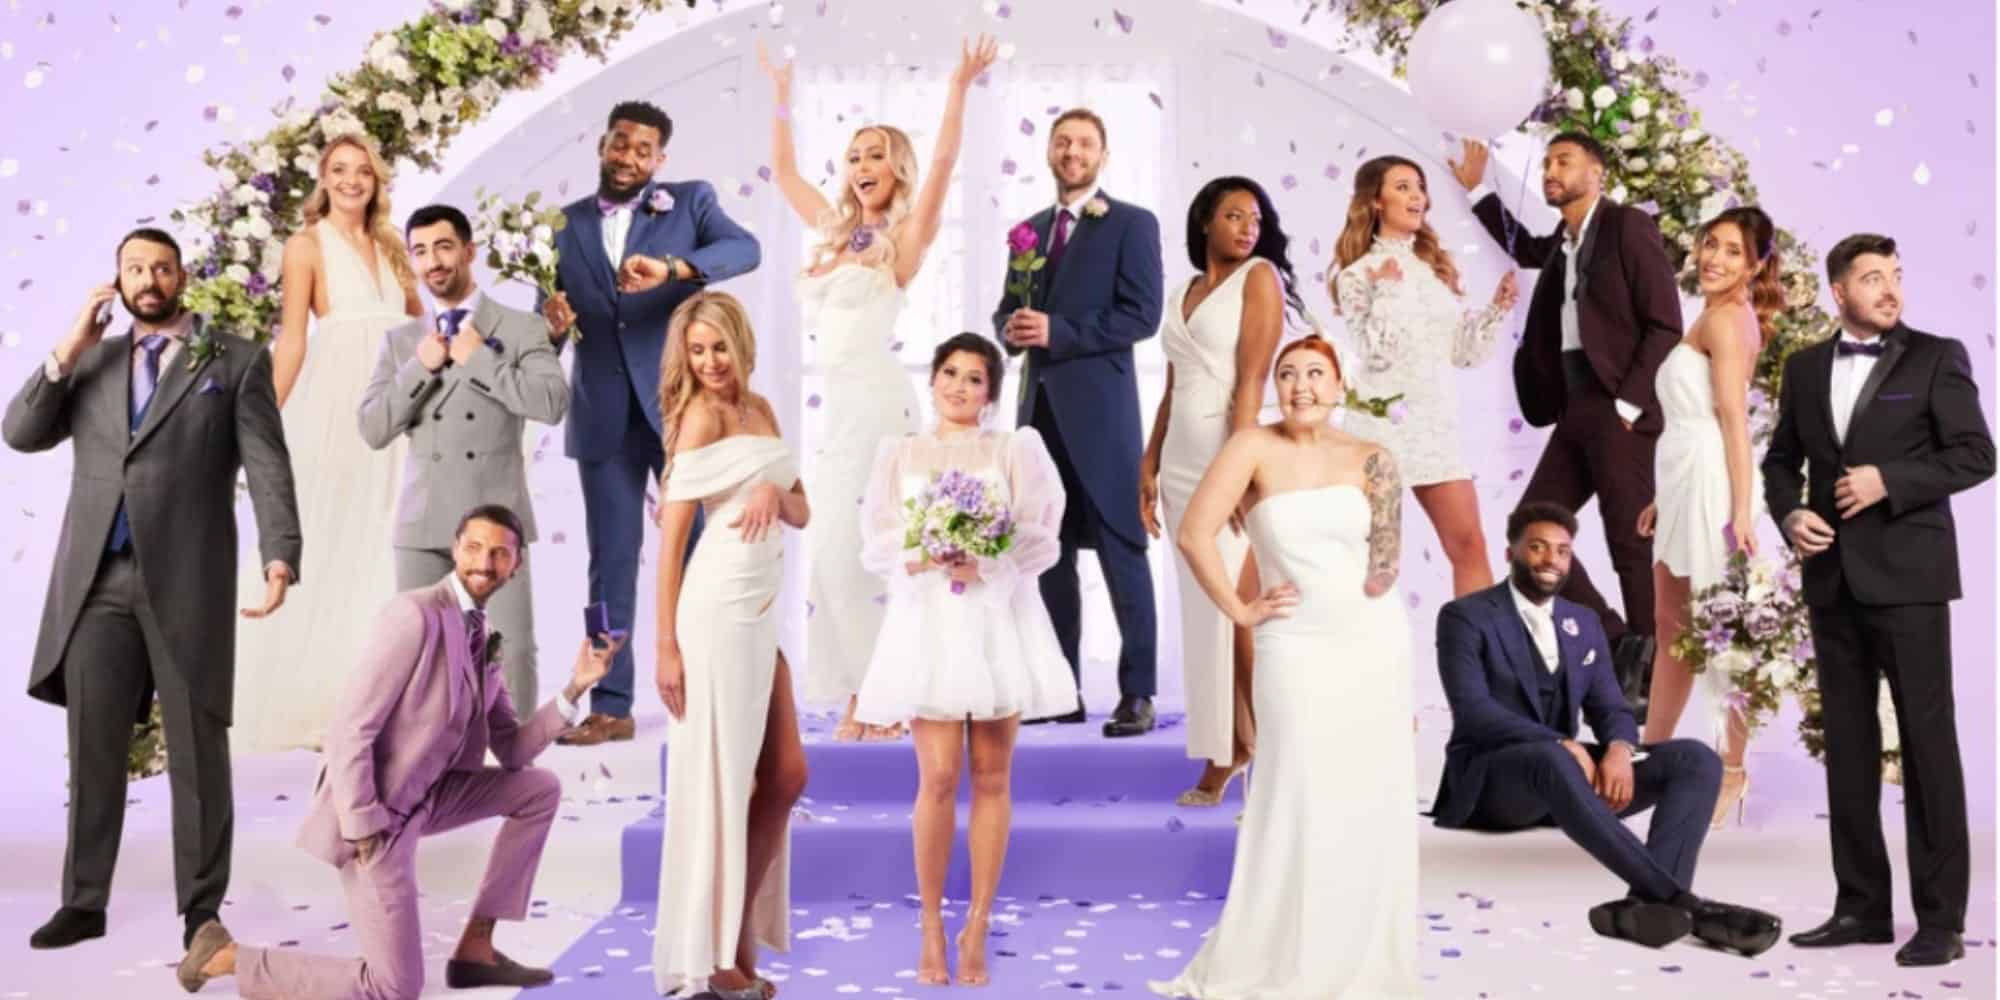 Married At First Sight UK Season 8 Episode 3 Release Date, Spoilers